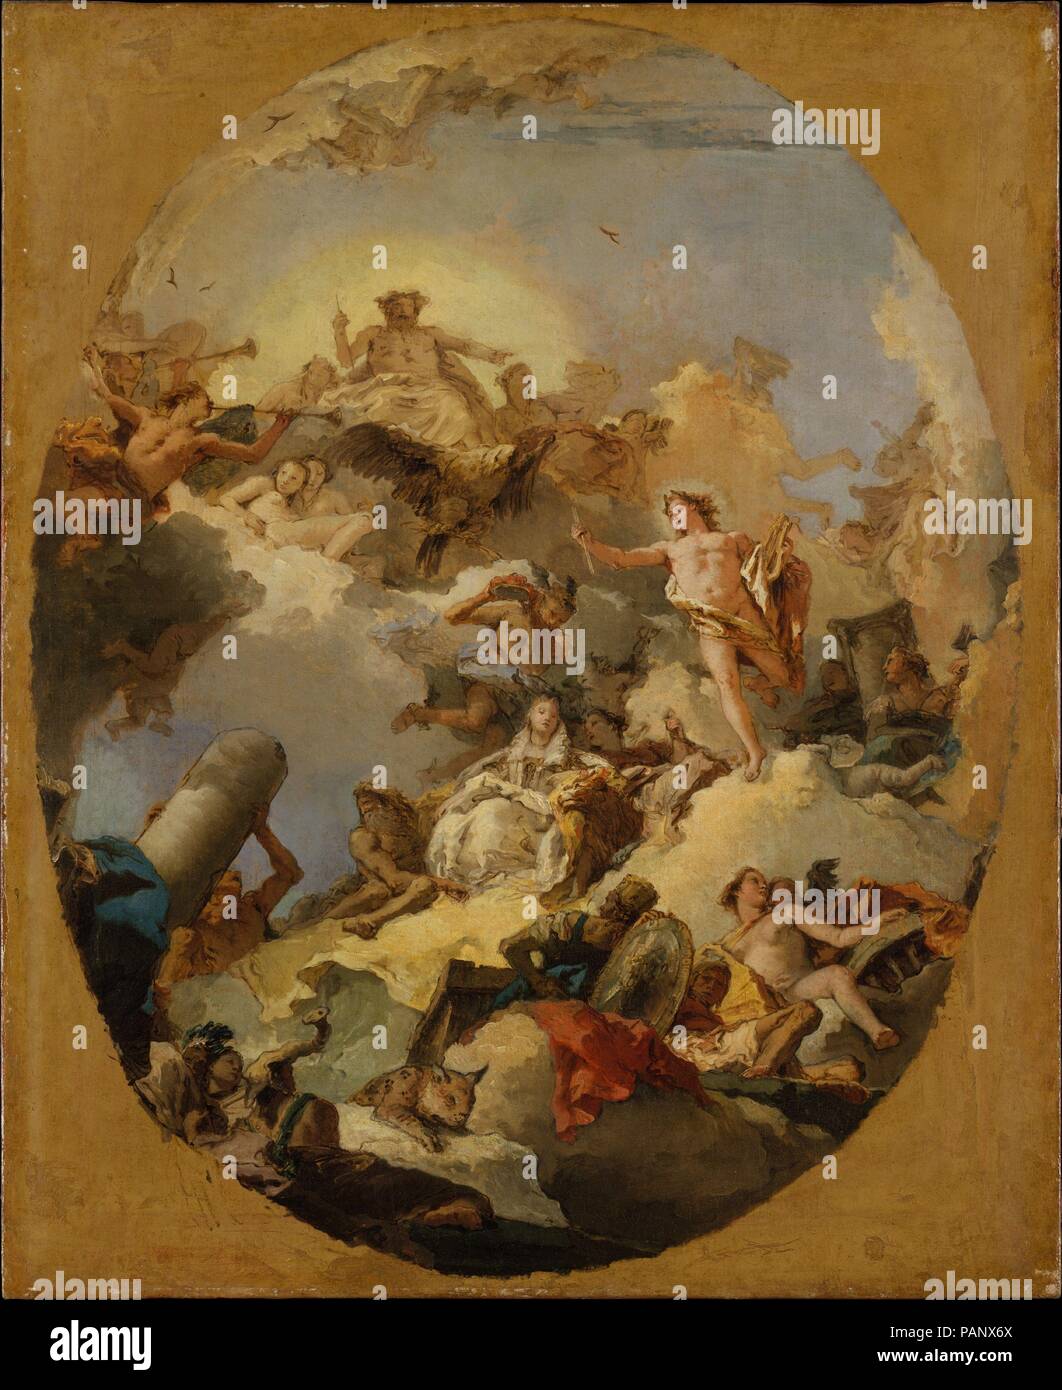 The Apotheosis of the Spanish Monarchy. Artist: Giovanni Battista Tiepolo (Italian, Venice 1696-1770 Madrid). Dimensions: Oval painted surface, 33 1/8 x 27 1/8 in. (84.1 x 68.9 cm). Date: 1760s.  This oil sketch for the ceiling of the <i>saleta</i> adjacent to the throne room of the Palacio Real, Madrid, differs from an alternative version (37.165.3) in the prominence given to Jupiter and his eagle and to Apollo, god of the sun and patron of the arts. Elements of both compositions were used in the final fresco. Museum: Metropolitan Museum of Art, New York, USA. Stock Photo